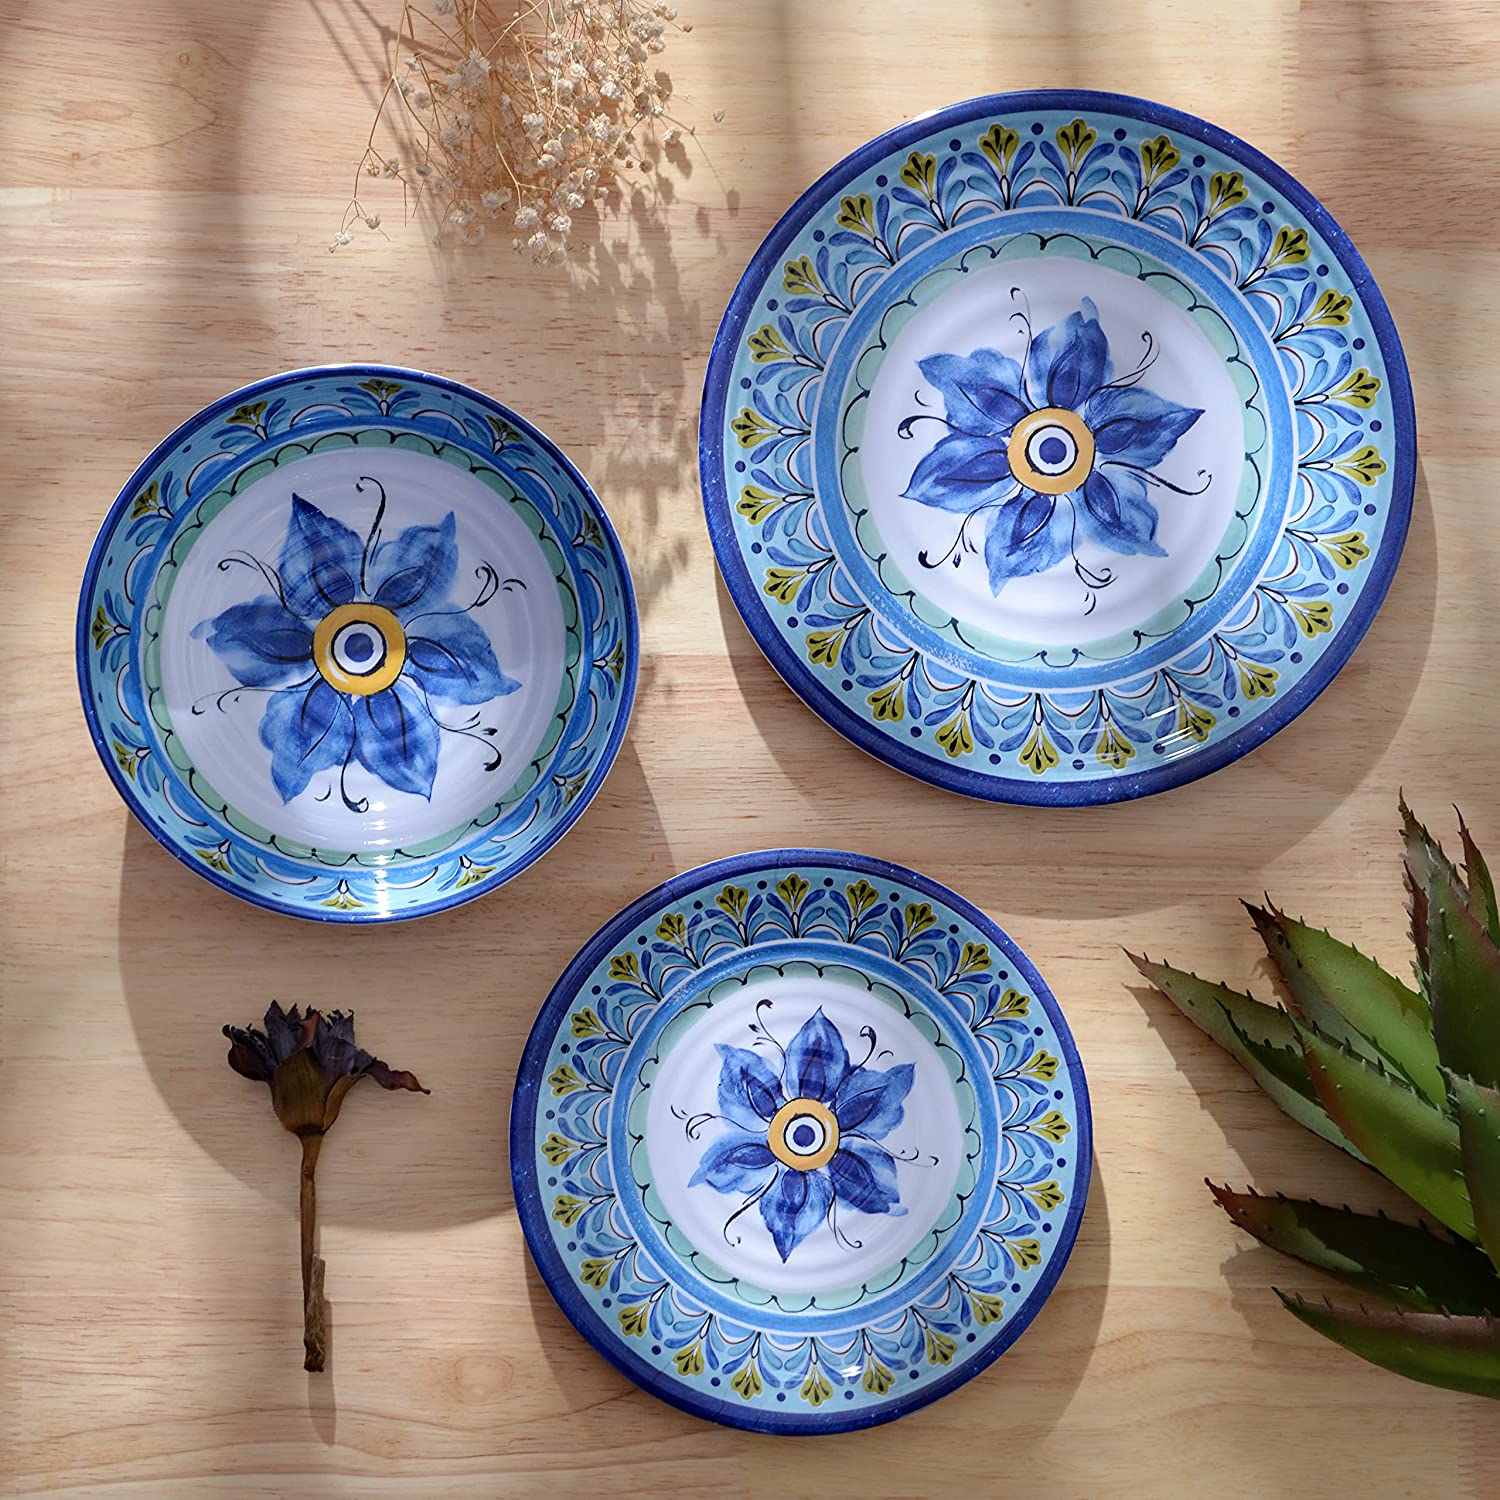 Stylish and practical: why melamine dinnerware set is a great choice for your home